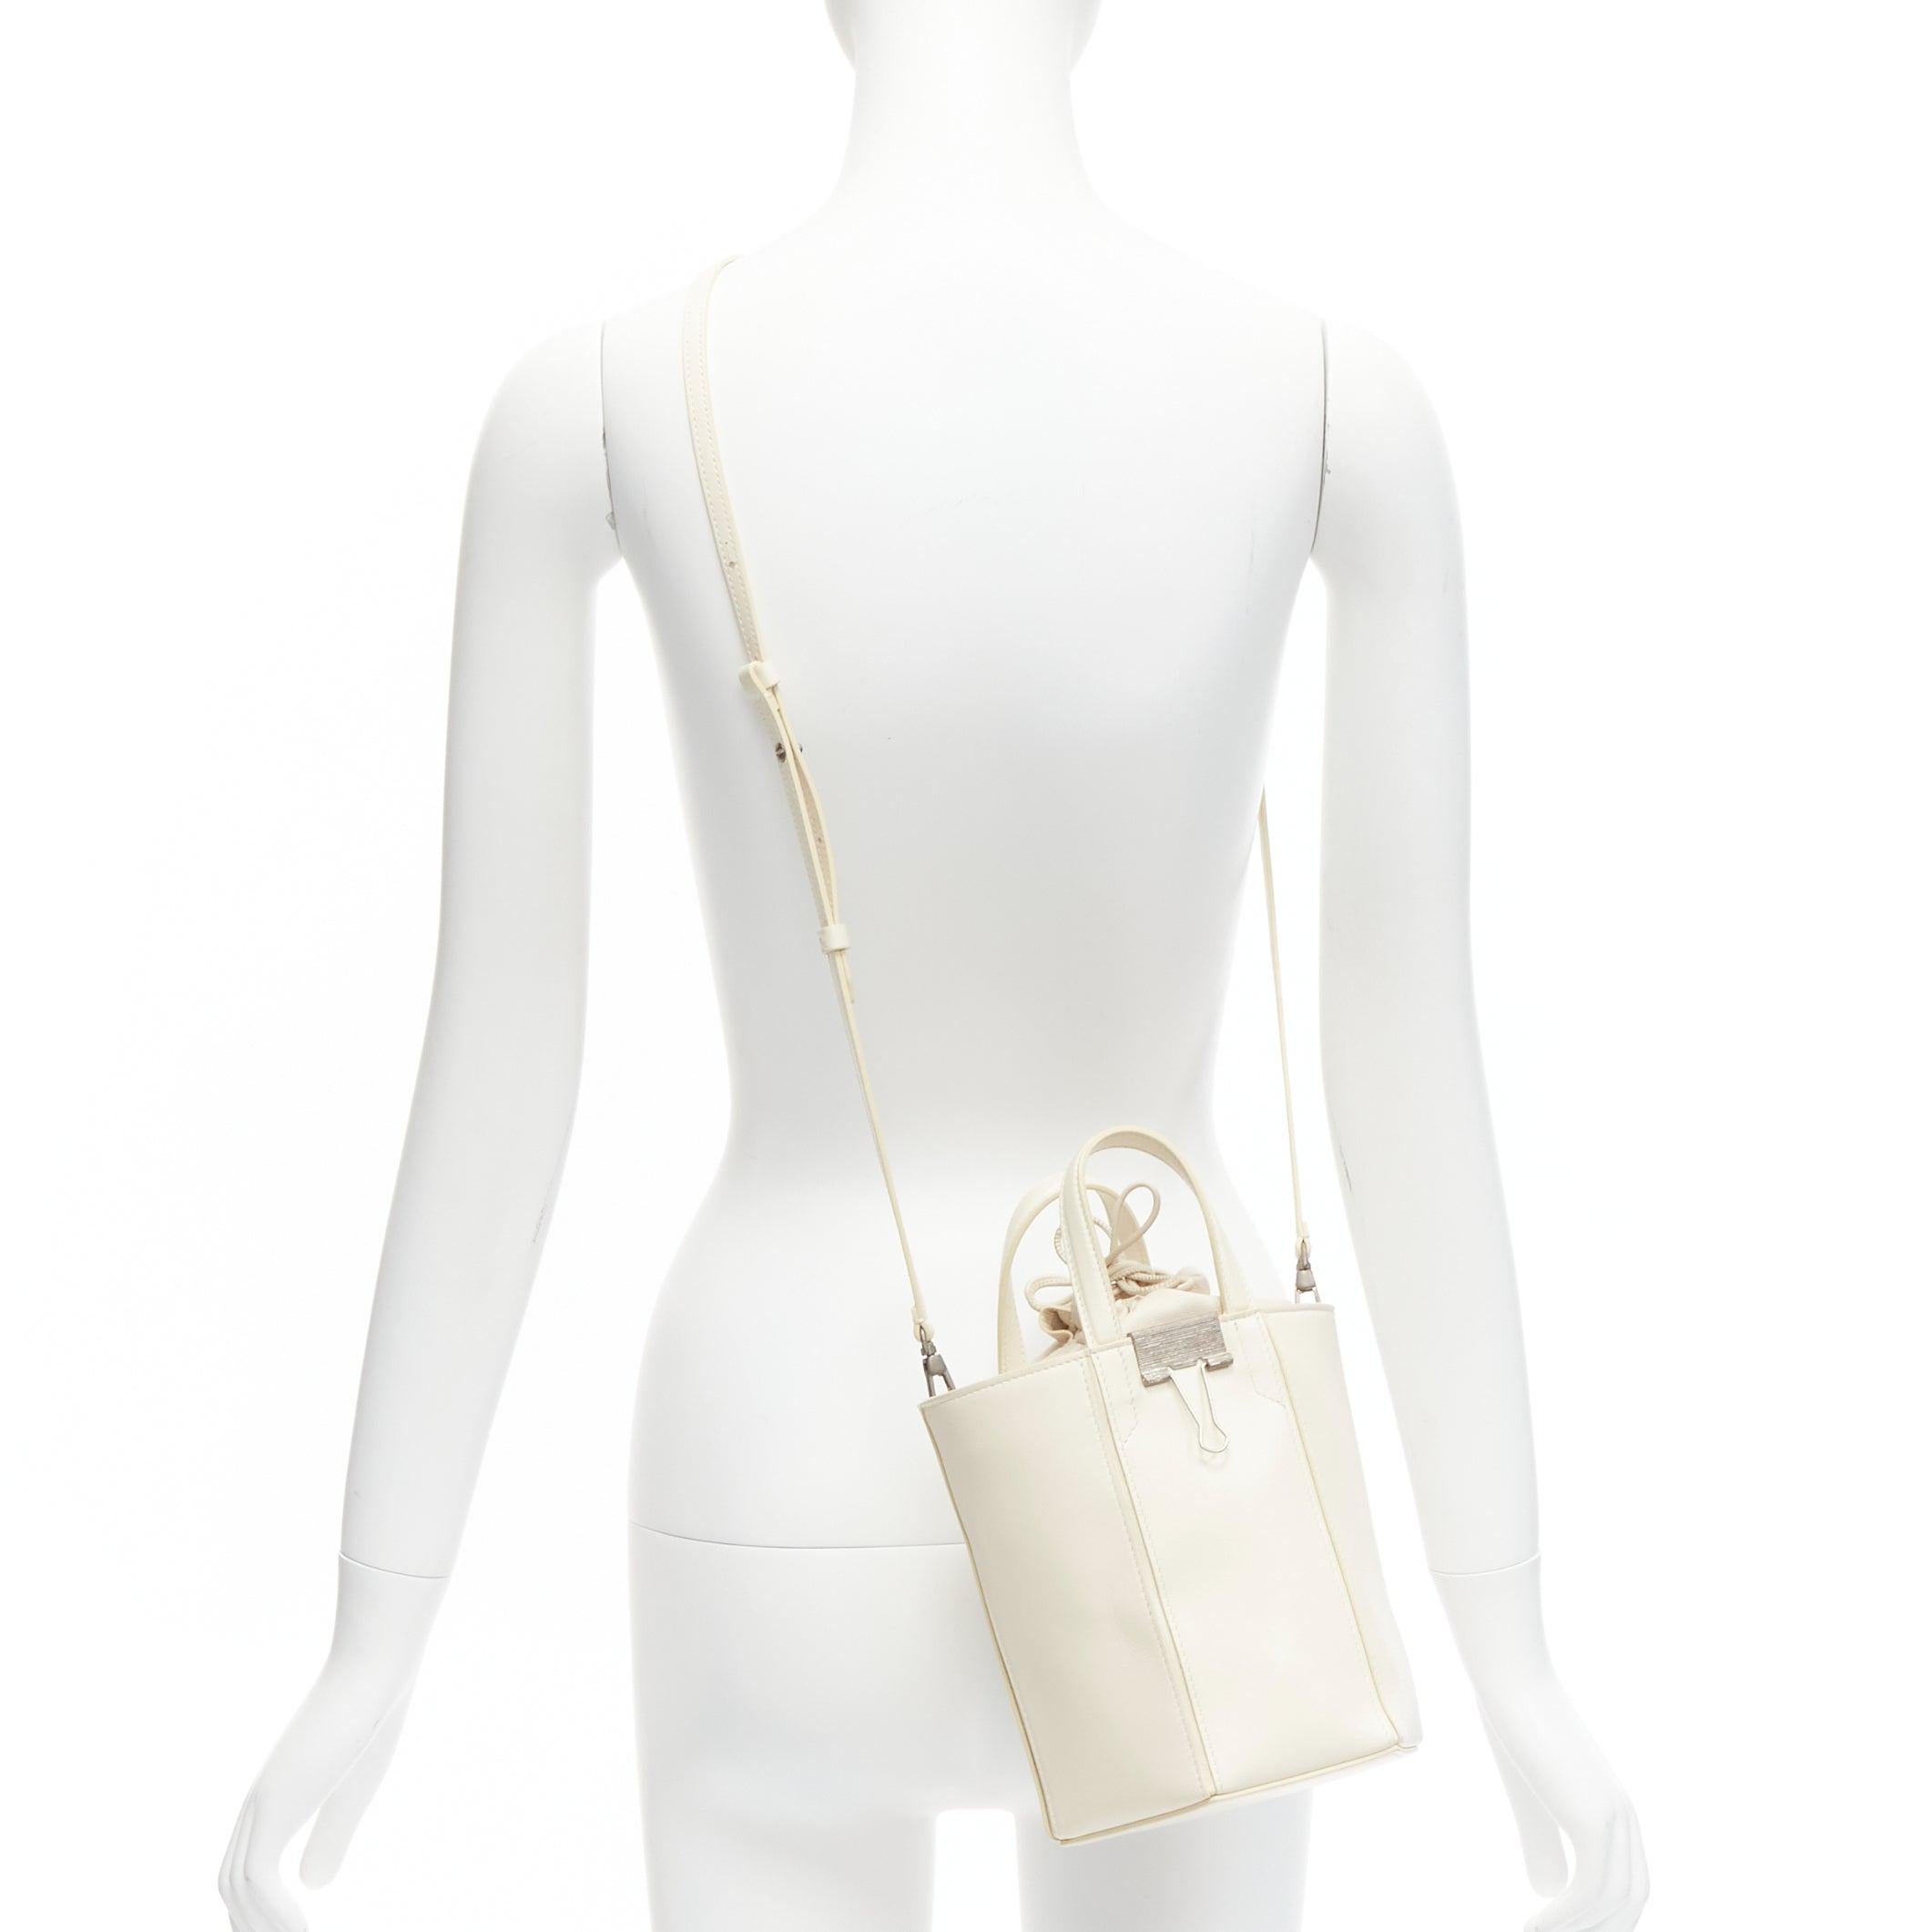 OFF WHITE Virgil Abloh Allen binder clip cream leather drawstring tote bag
Reference: BSHW/A00067
Brand: Off White
Designer: Virgil Abloh
Model: Allen
Material: Leather
Color: Cream
Pattern: Solid
Closure: Drawstring
Lining: Cream Leather
Made in: